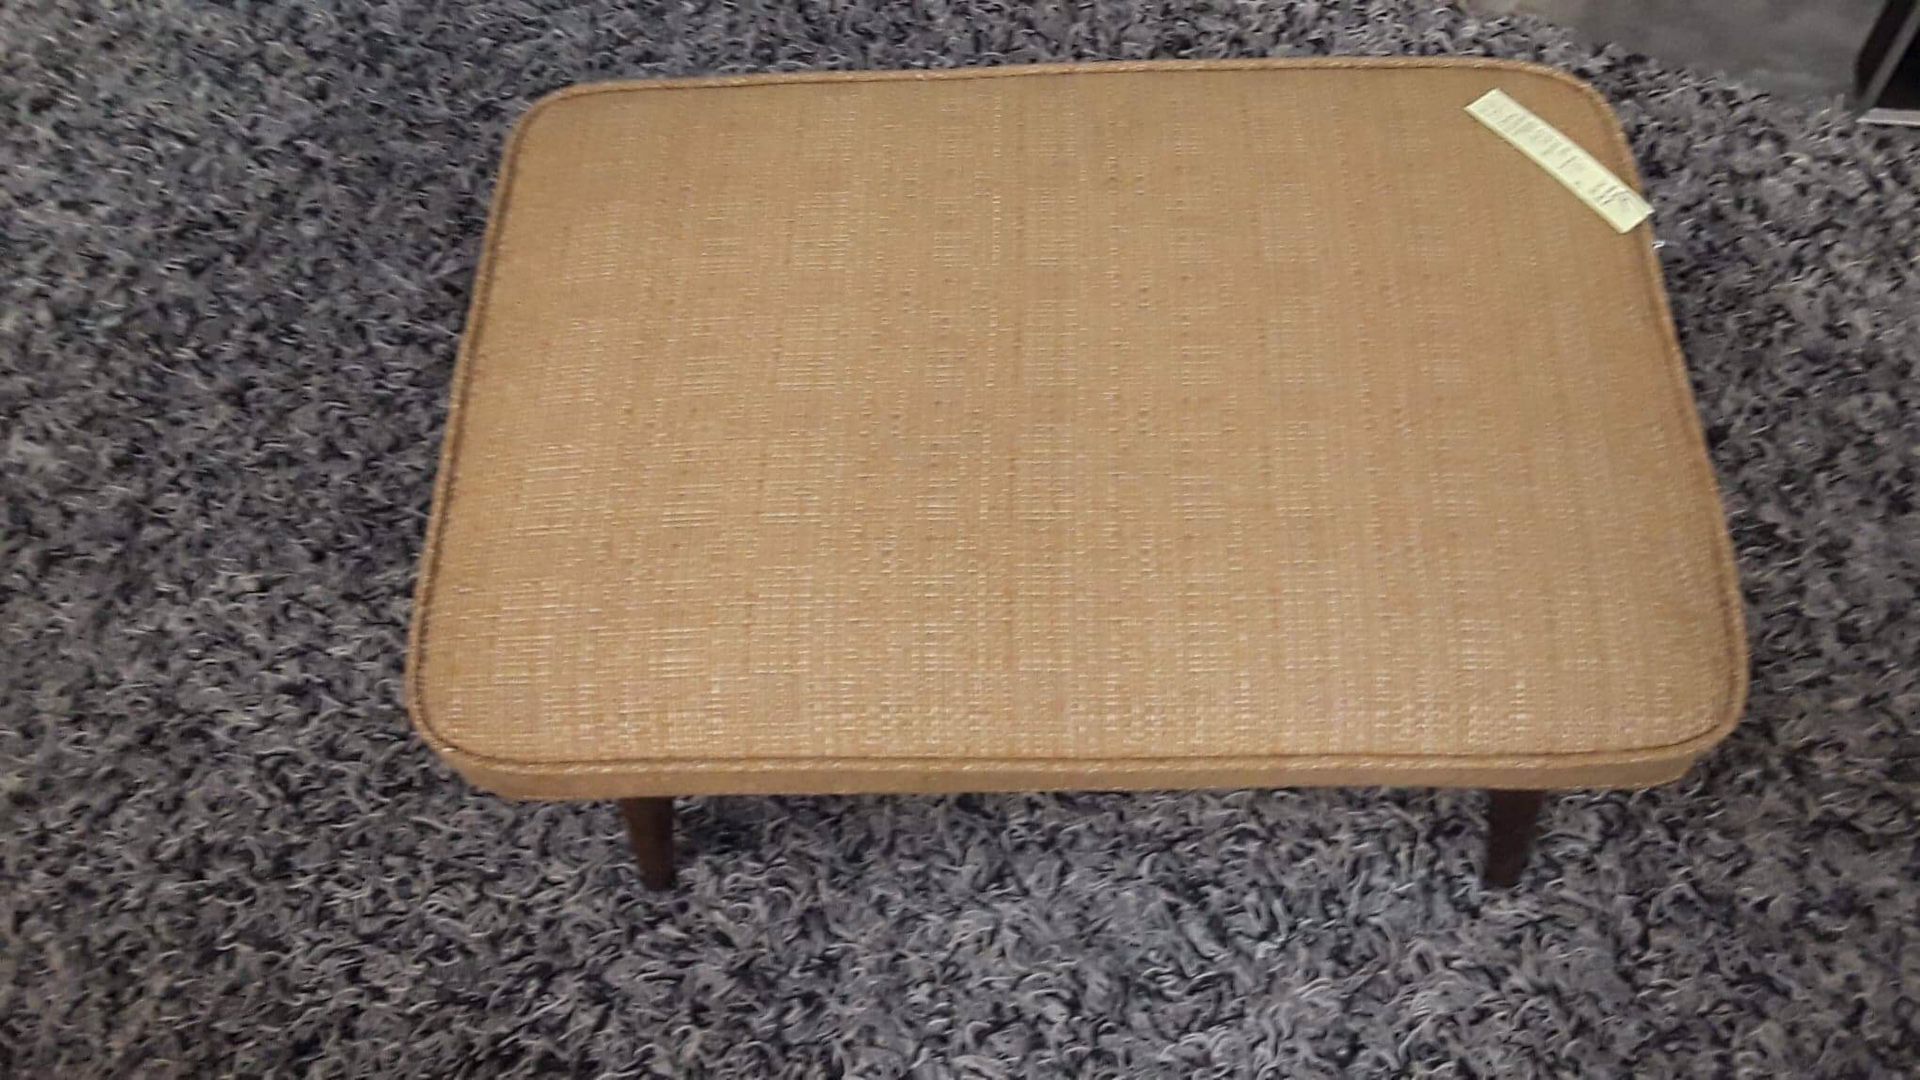 Vintage Mid Century reupholstered Foot Stool with wooden tapered legs. Price $95. Located at Long Beach Antique Mall 2, signal Hill, Ca